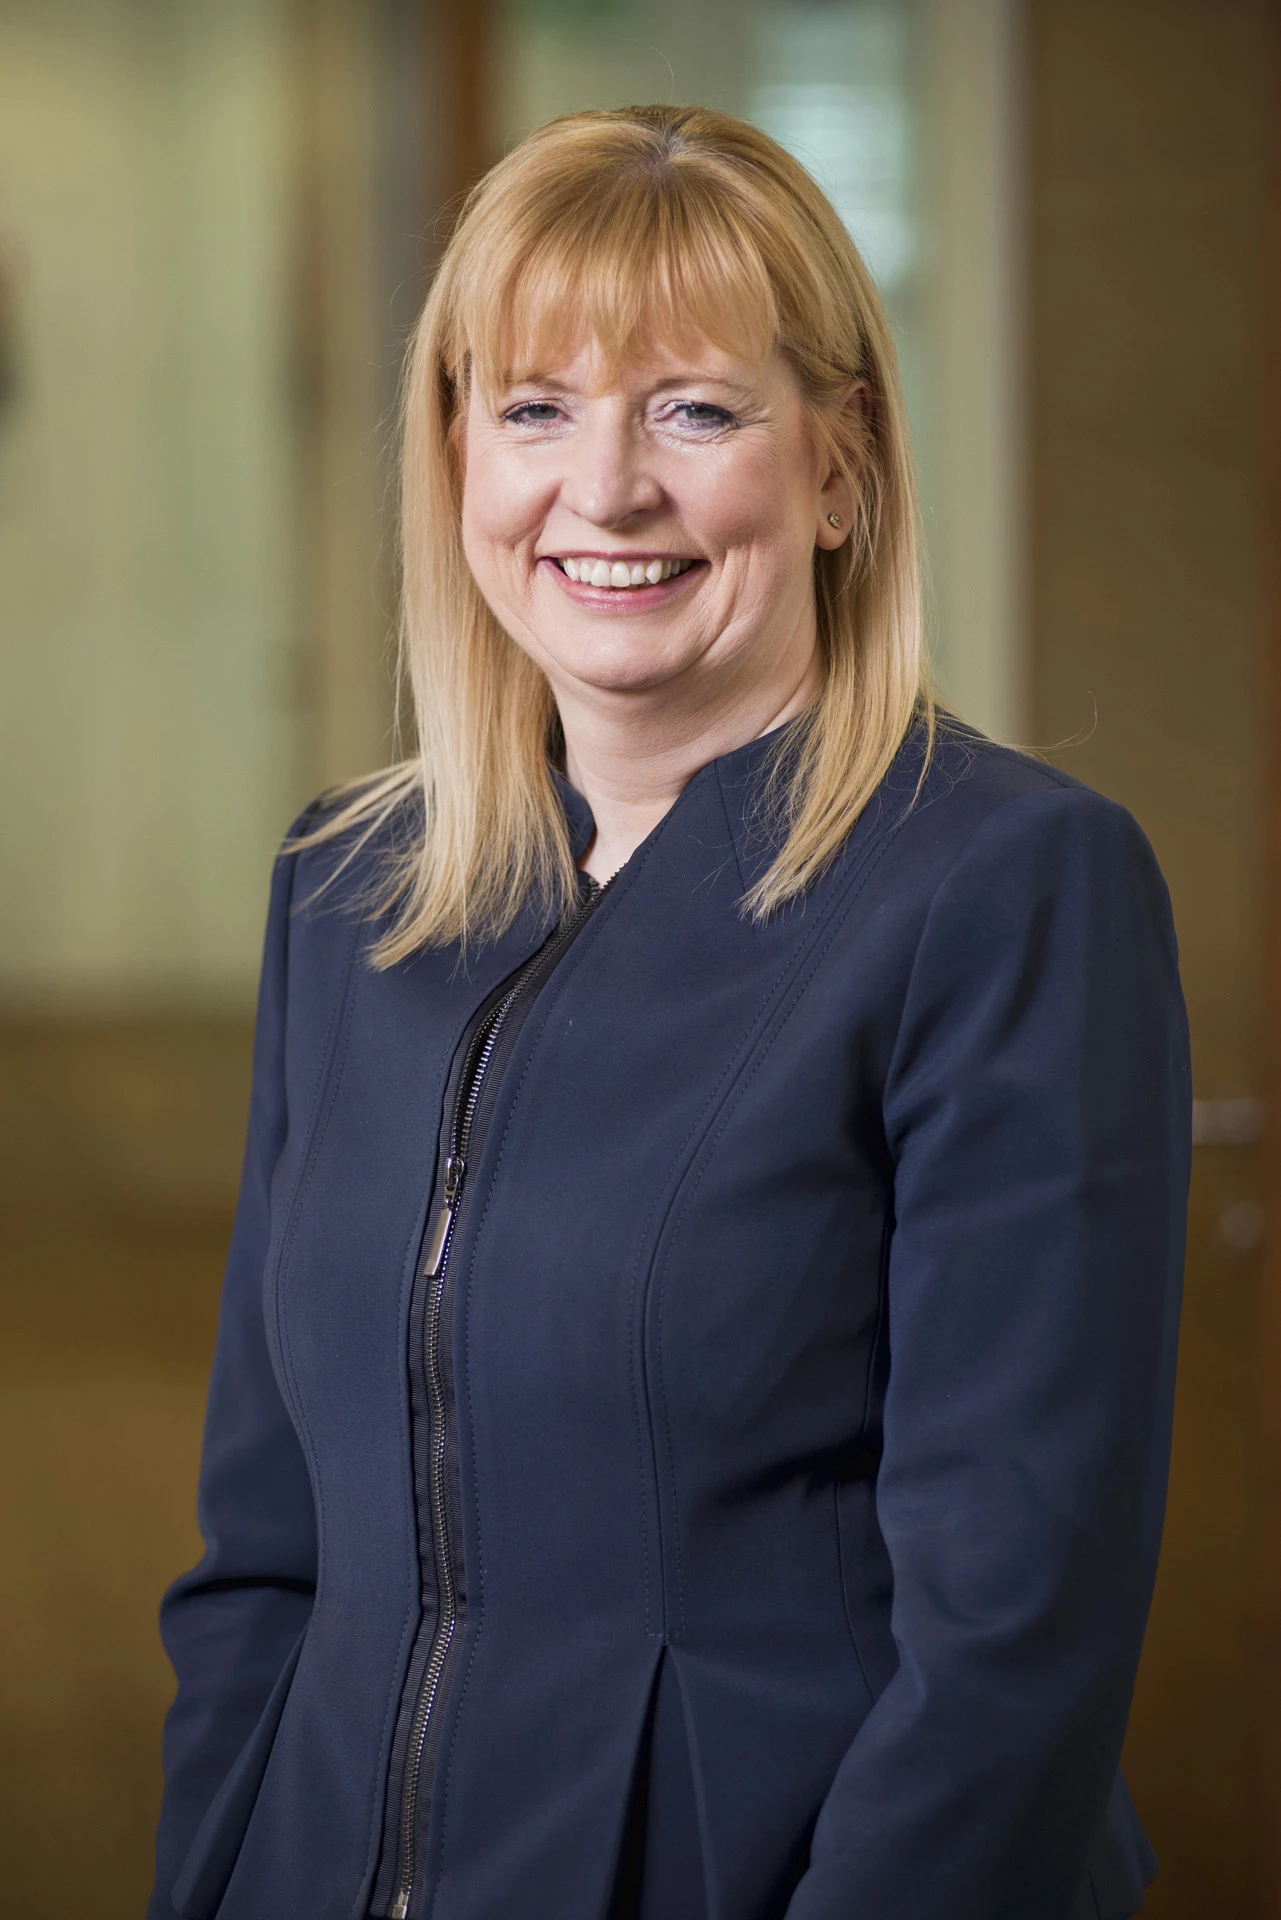 Karen Campbell-Williams, UK Head of Tax and Partner at Grant Thornton